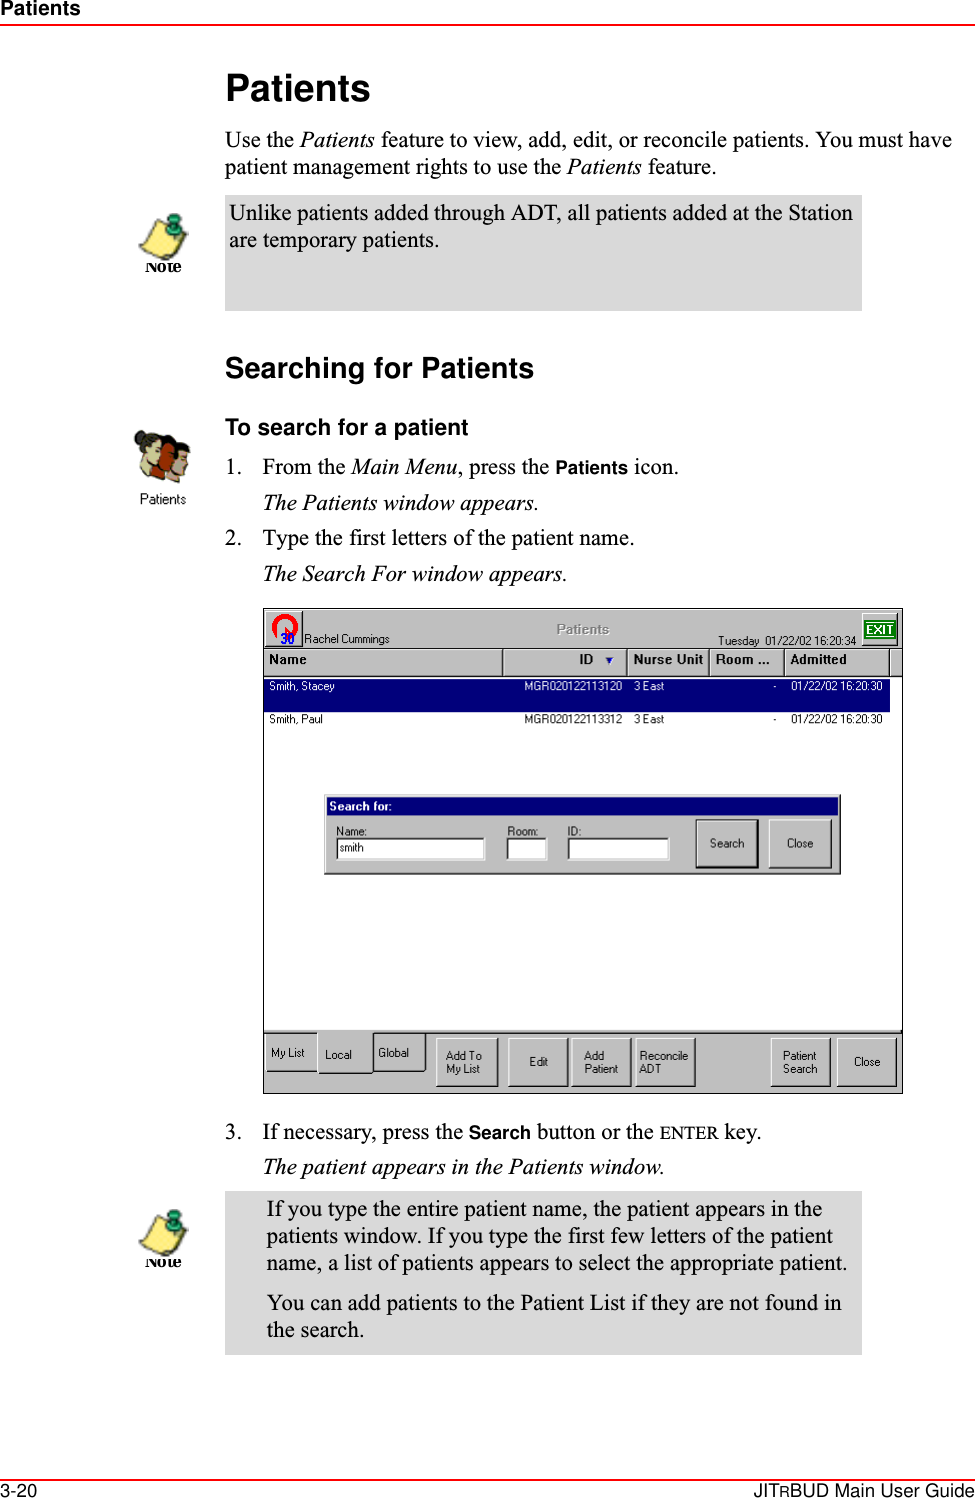 Patients3-20 JITRBUD Main User GuidePatientsUse the Patients feature to view, add, edit, or reconcile patients. You must have patient management rights to use the Patients feature. Searching for PatientsTo search for a patient1. From the Main Menu, press the Patients icon.The Patients window appears.2. Type the first letters of the patient name.The Search For window appears.3. If necessary, press the Search button or the ENTER key. The patient appears in the Patients window.Unlike patients added through ADT, all patients added at the Station are temporary patients.If you type the entire patient name, the patient appears in the patients window. If you type the first few letters of the patient name, a list of patients appears to select the appropriate patient.You can add patients to the Patient List if they are not found in the search.NoteNote